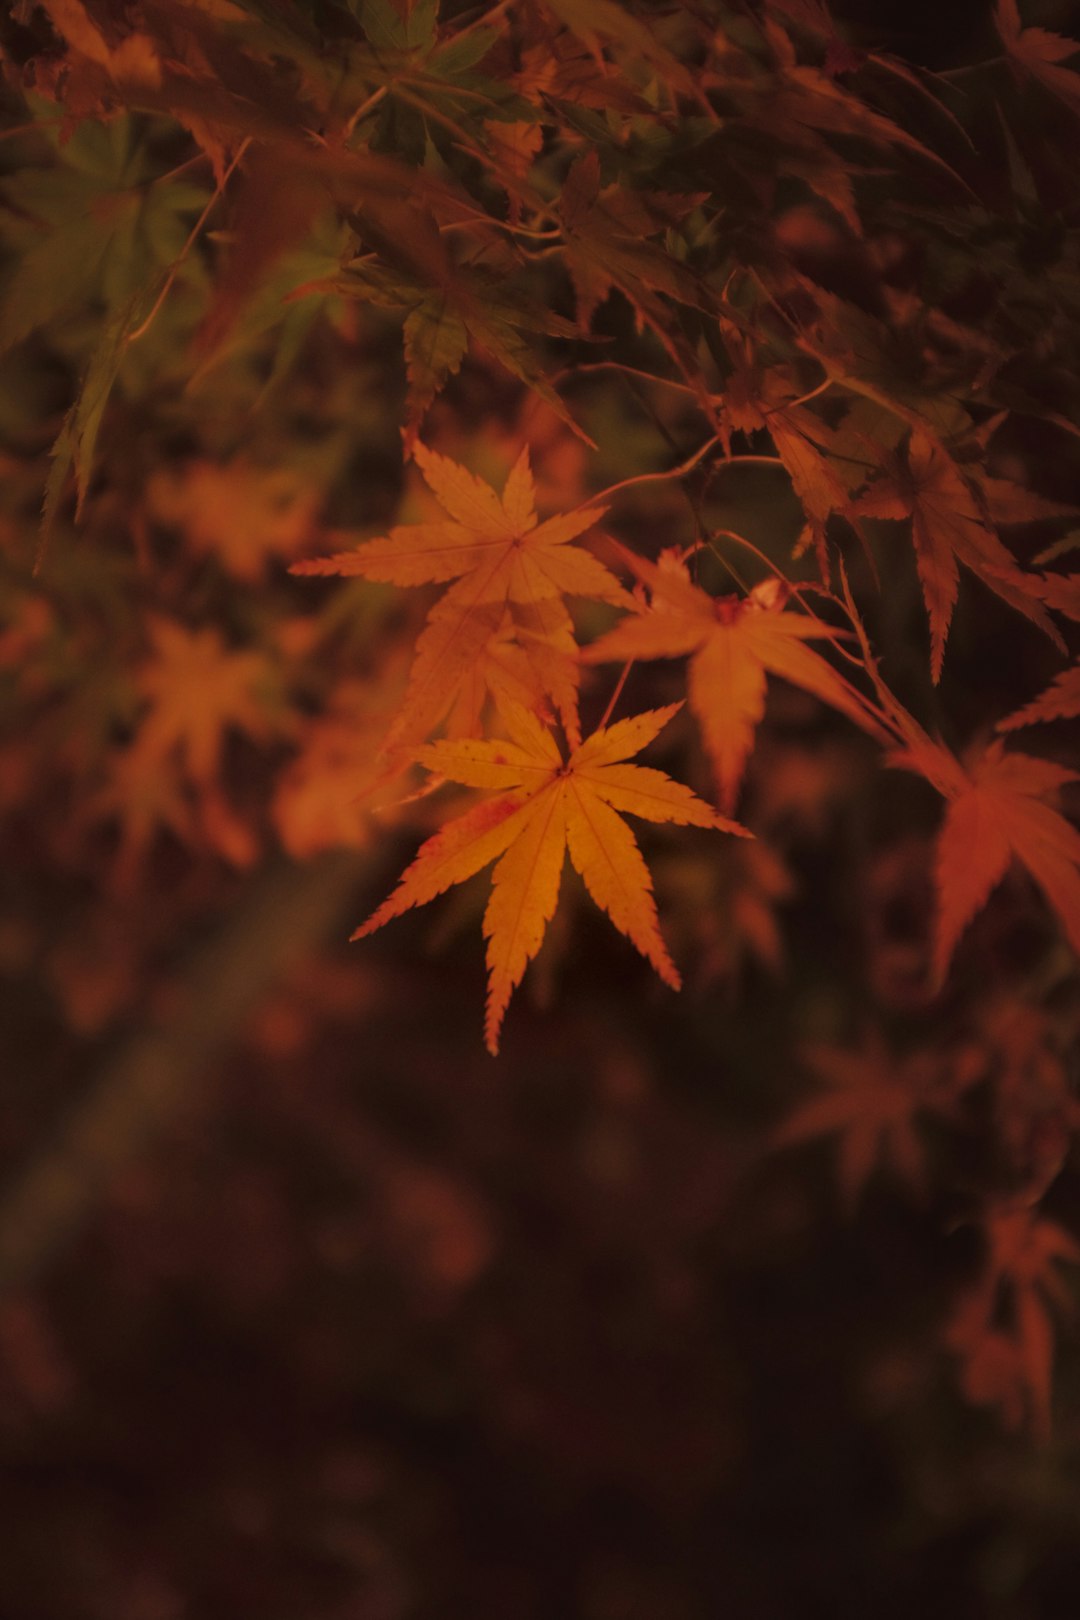 red maple leaves in close up photography